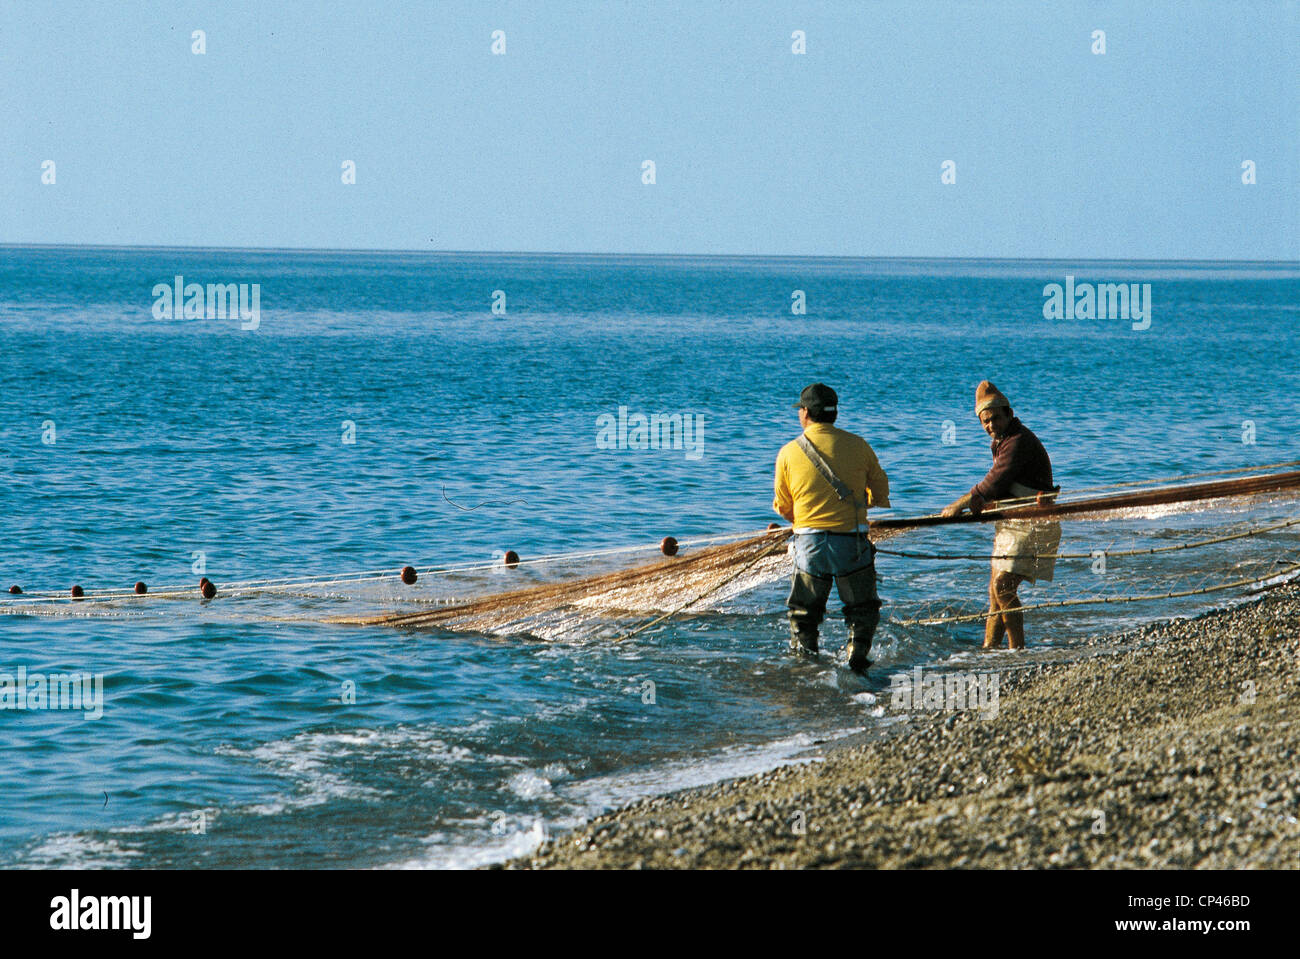 CALABRIA, Statues (RC). Bottom trawling THAT SEINER Stock Photo